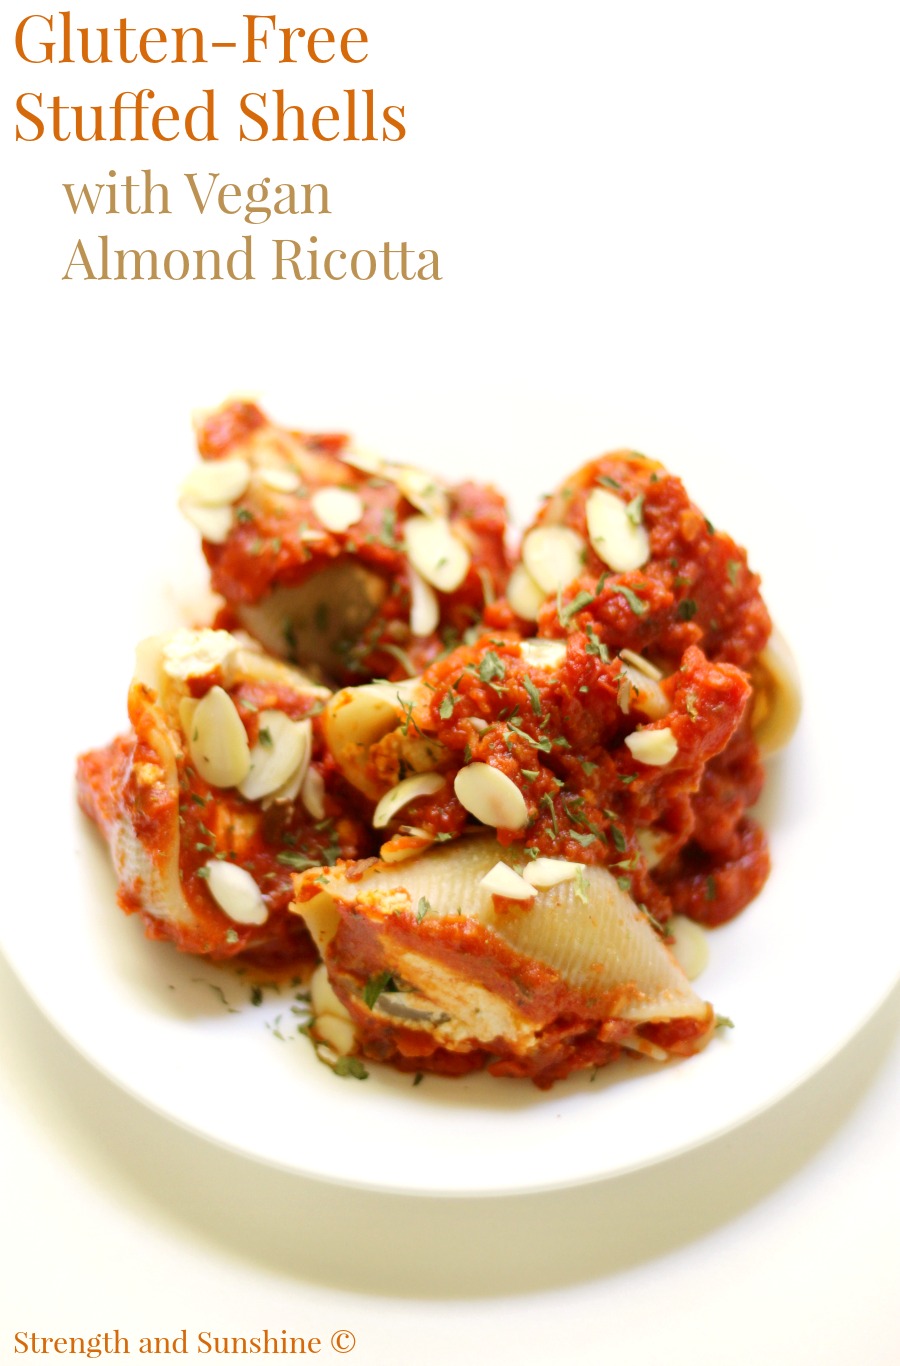 Gluten-Free Stuffed Shells with Vegan Almond Ricotta | Strength and Sunshine @RebeccaGF666 A classic Italian dinner recipe made-over so everyone can enjoy. Gluten-Free Stuffed Shells with Vegan Almond Ricotta and a homemade sun-dried tomato sauce! A cozy family meal that leaves bellies full and hearts warm!